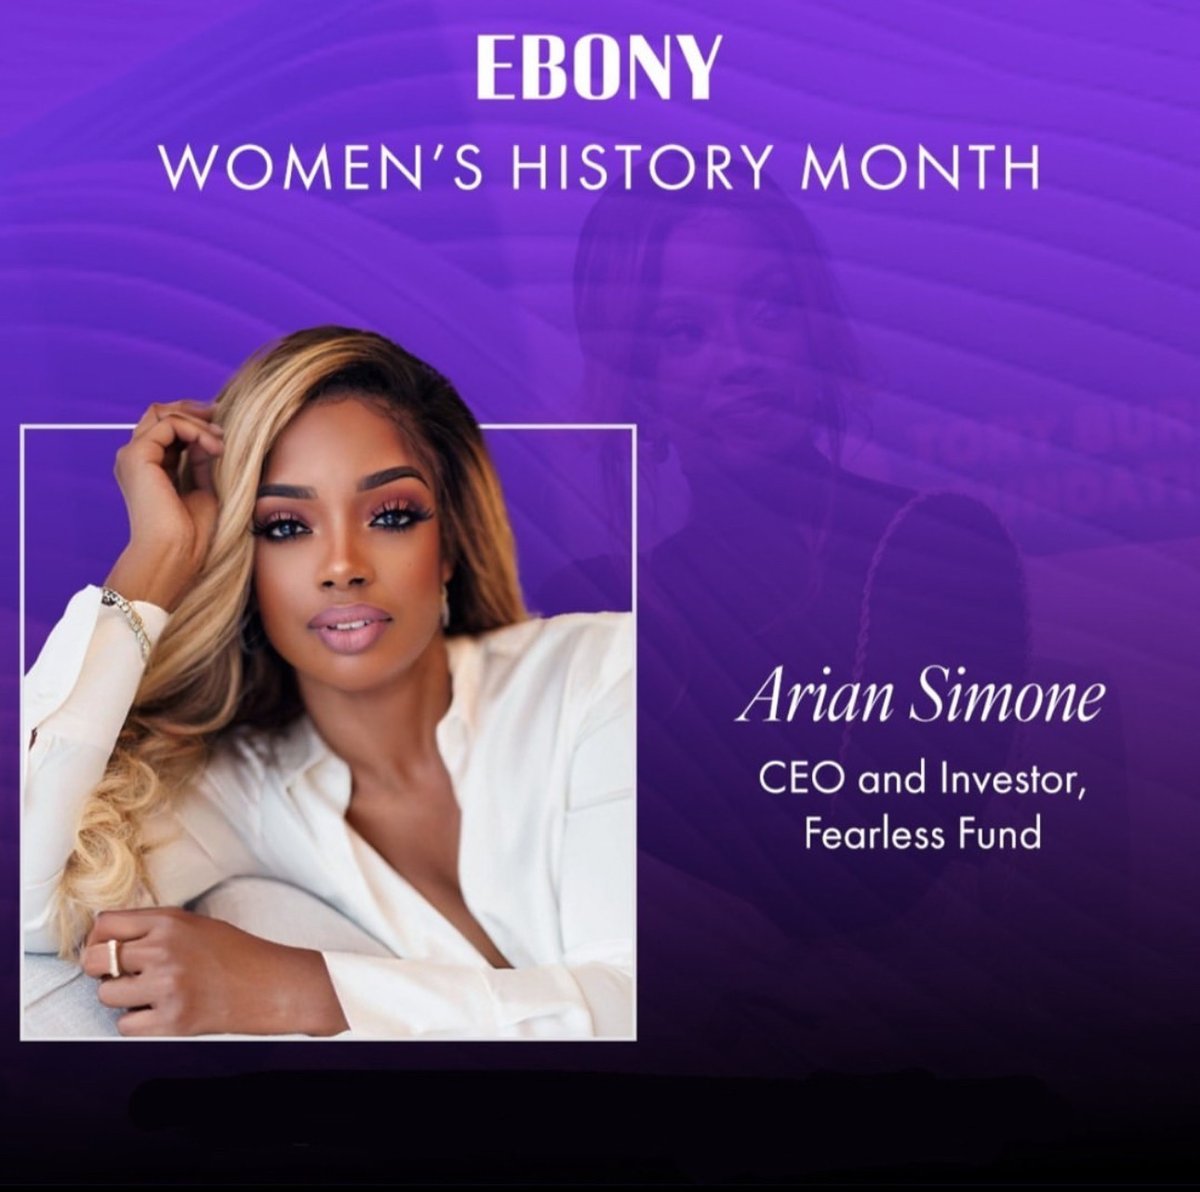 These women take #BlackGirlMagic to whole new level. ✨ Learn more about our EBONY Changemakers here: ebony.com/magazine/march… #WomensHistoryMonth